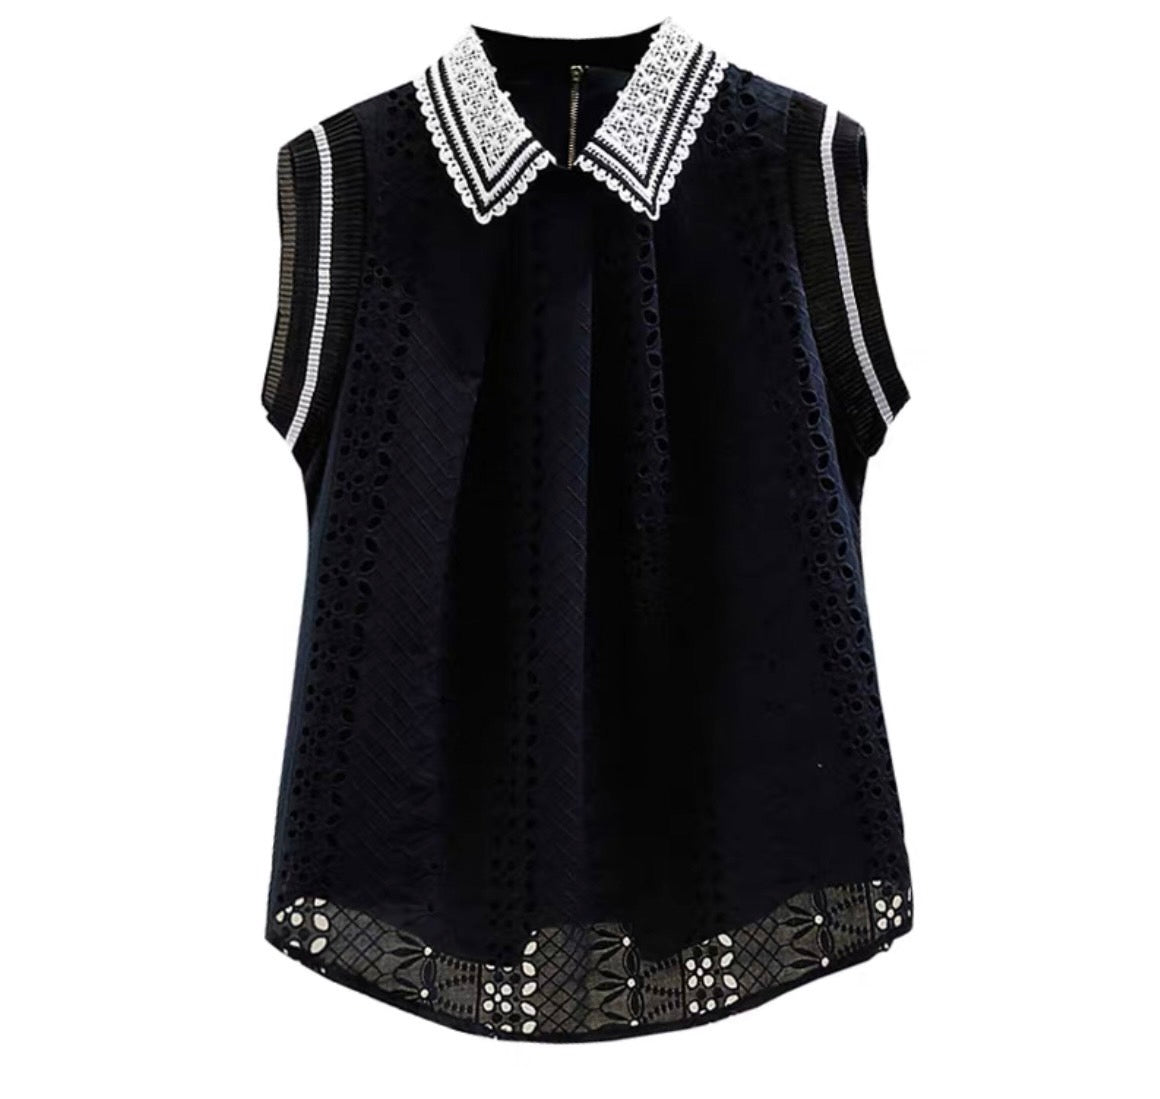 Lace sleeveless vest with collar